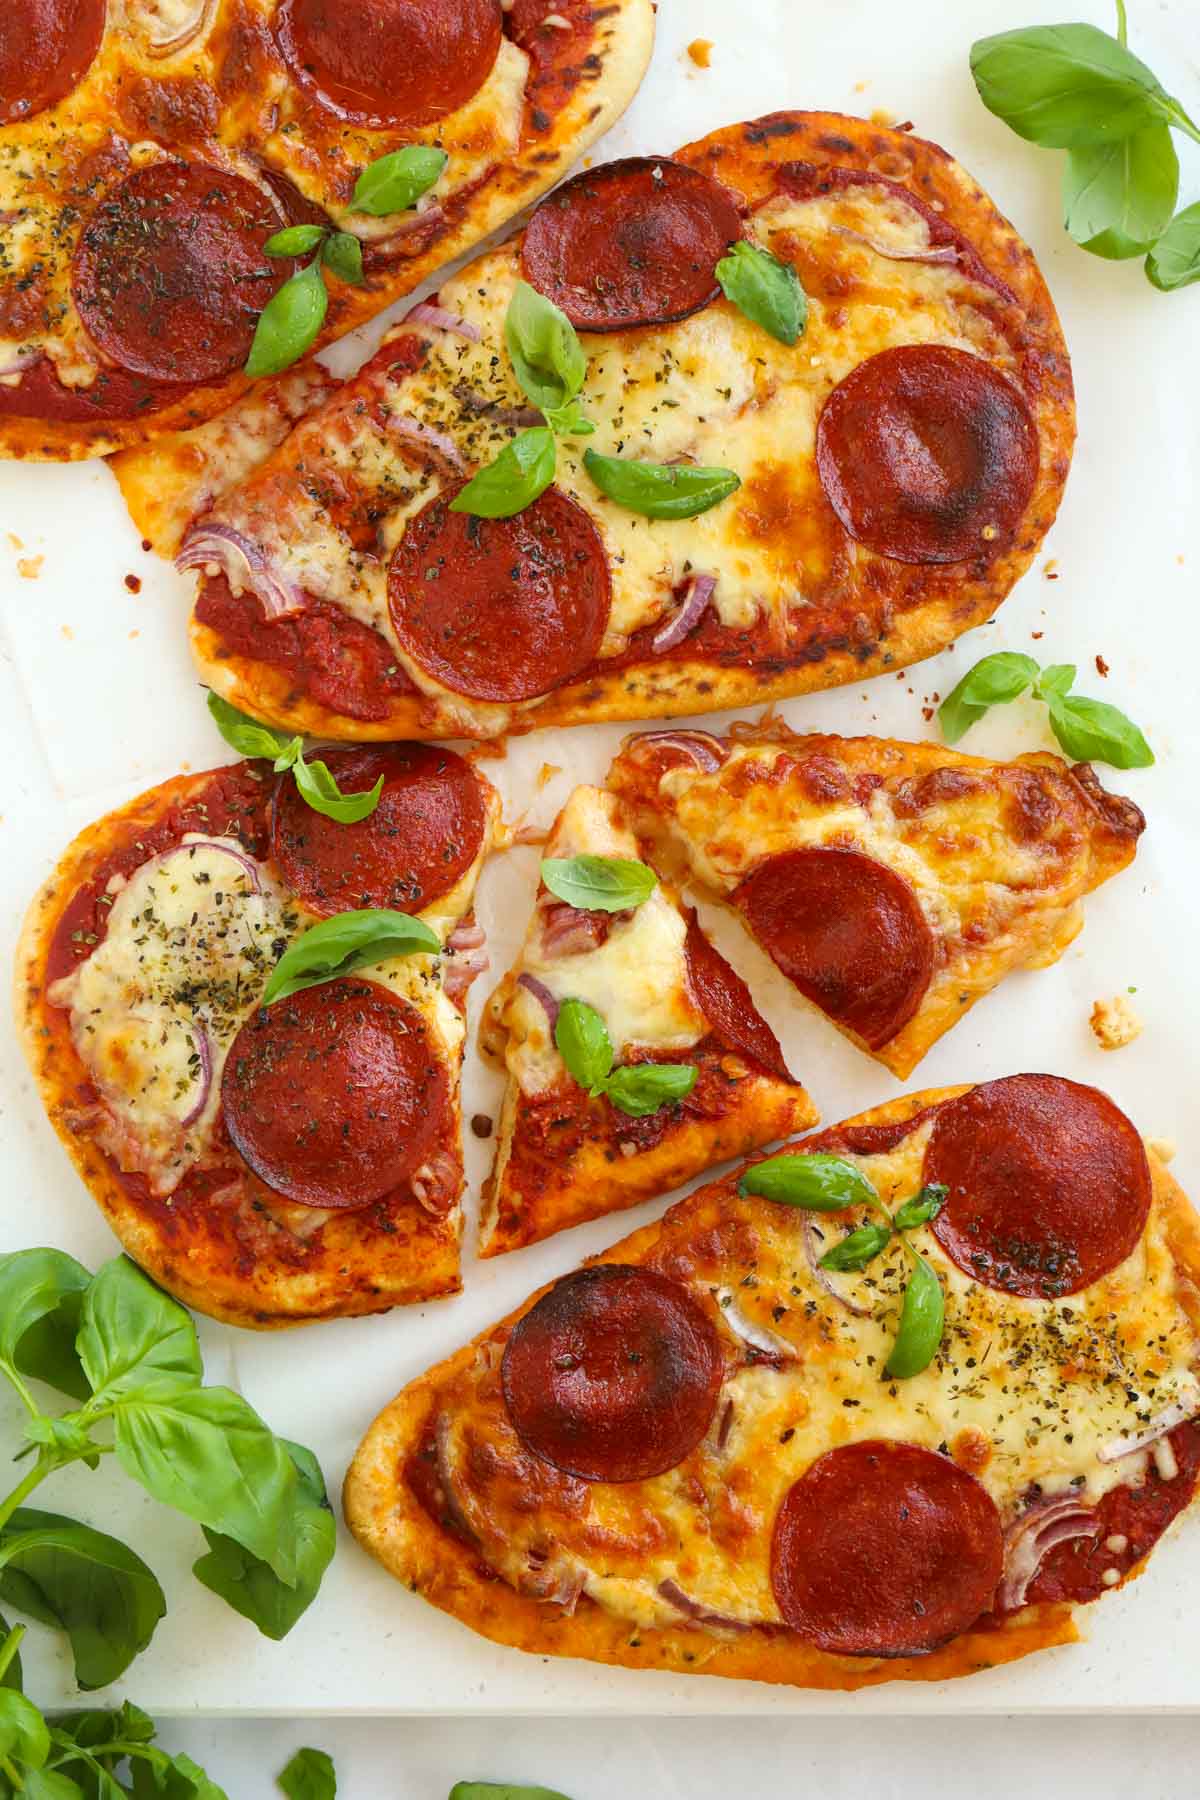 Perfect for a lunch, snack or quick dinner, these naan bread pizzas are a family favourite recipe